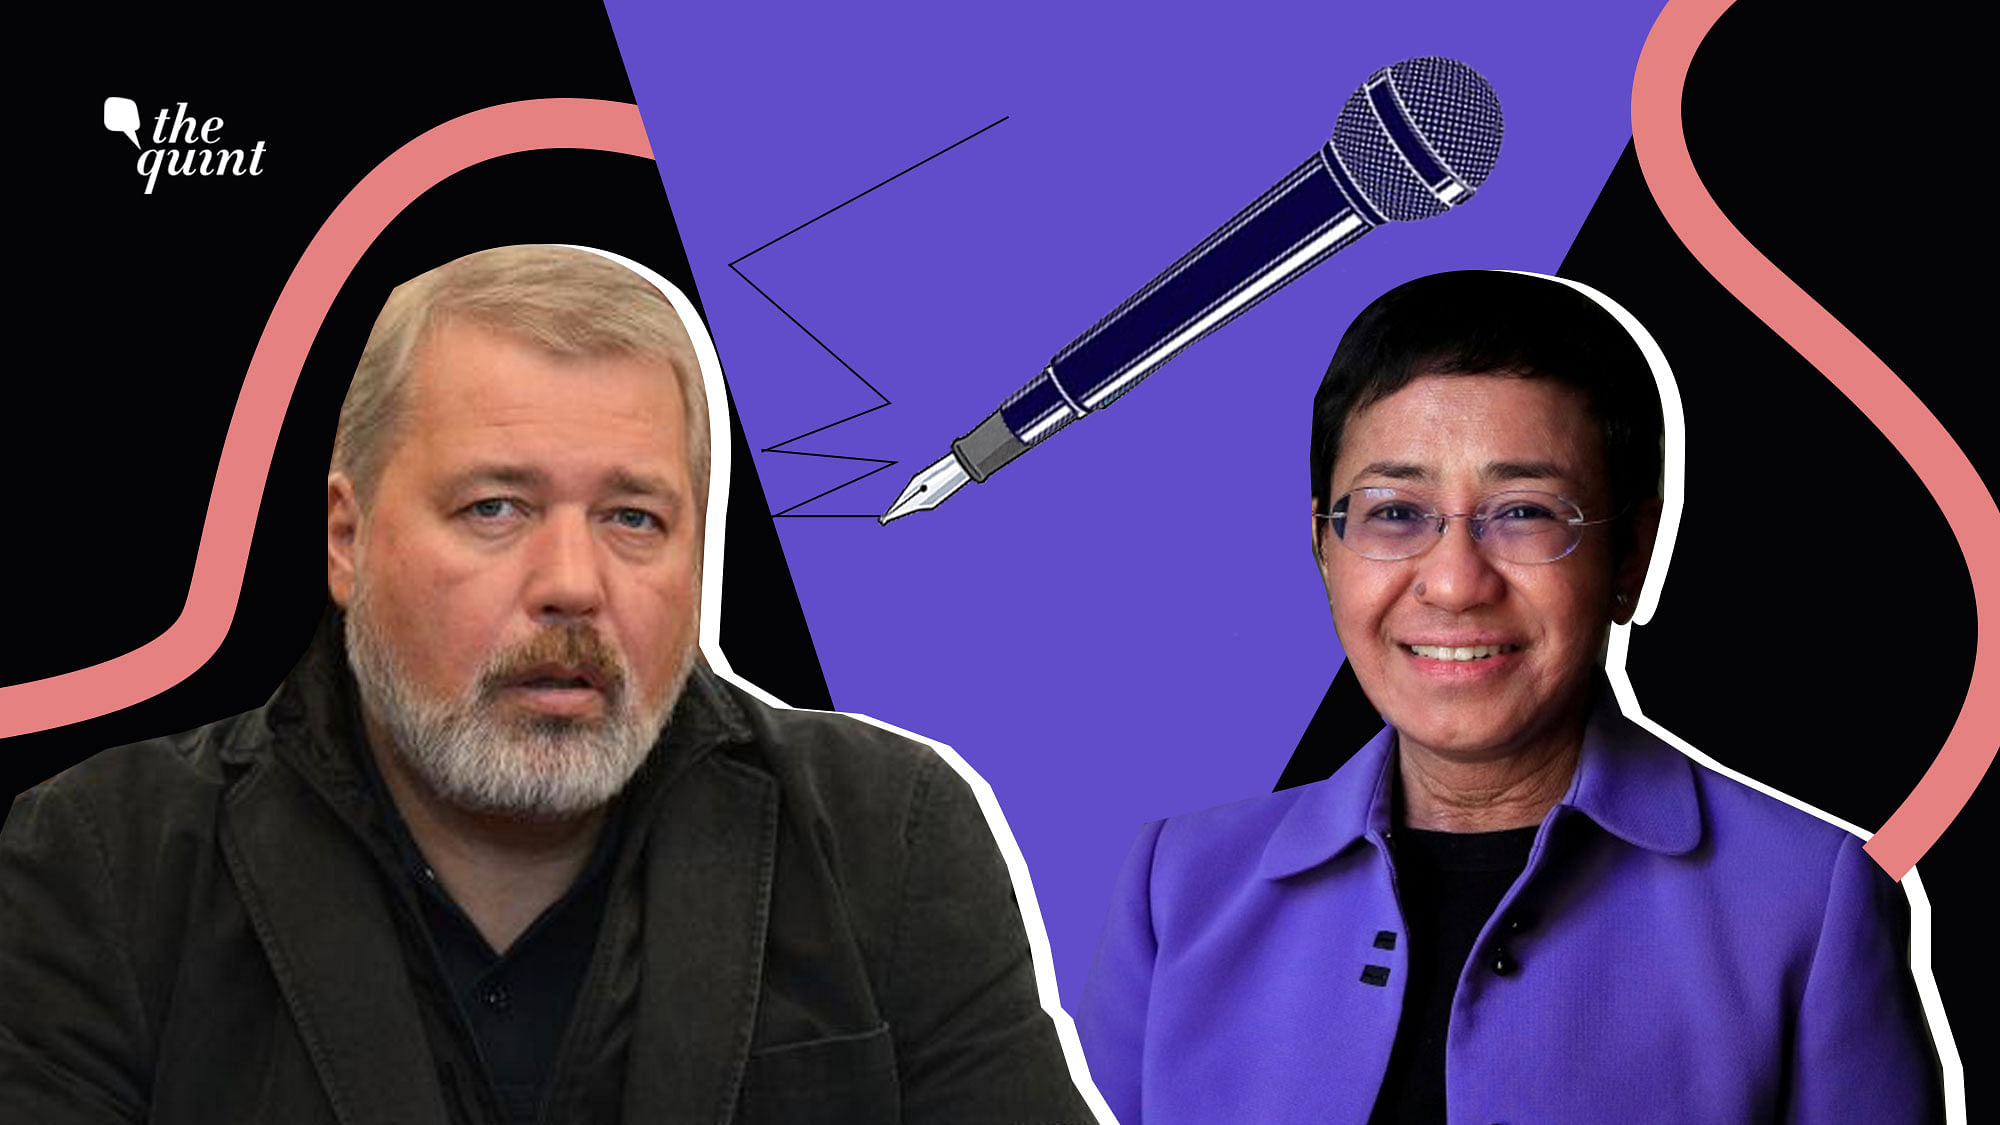 <div class="paragraphs"><p>Journalists Maria Ressa and Dmitry Muratov won the Nobel Peace Prize 2021 “for their efforts to safeguard freedom of expression, which is a precondition for democracy and lasting peace.”</p></div>